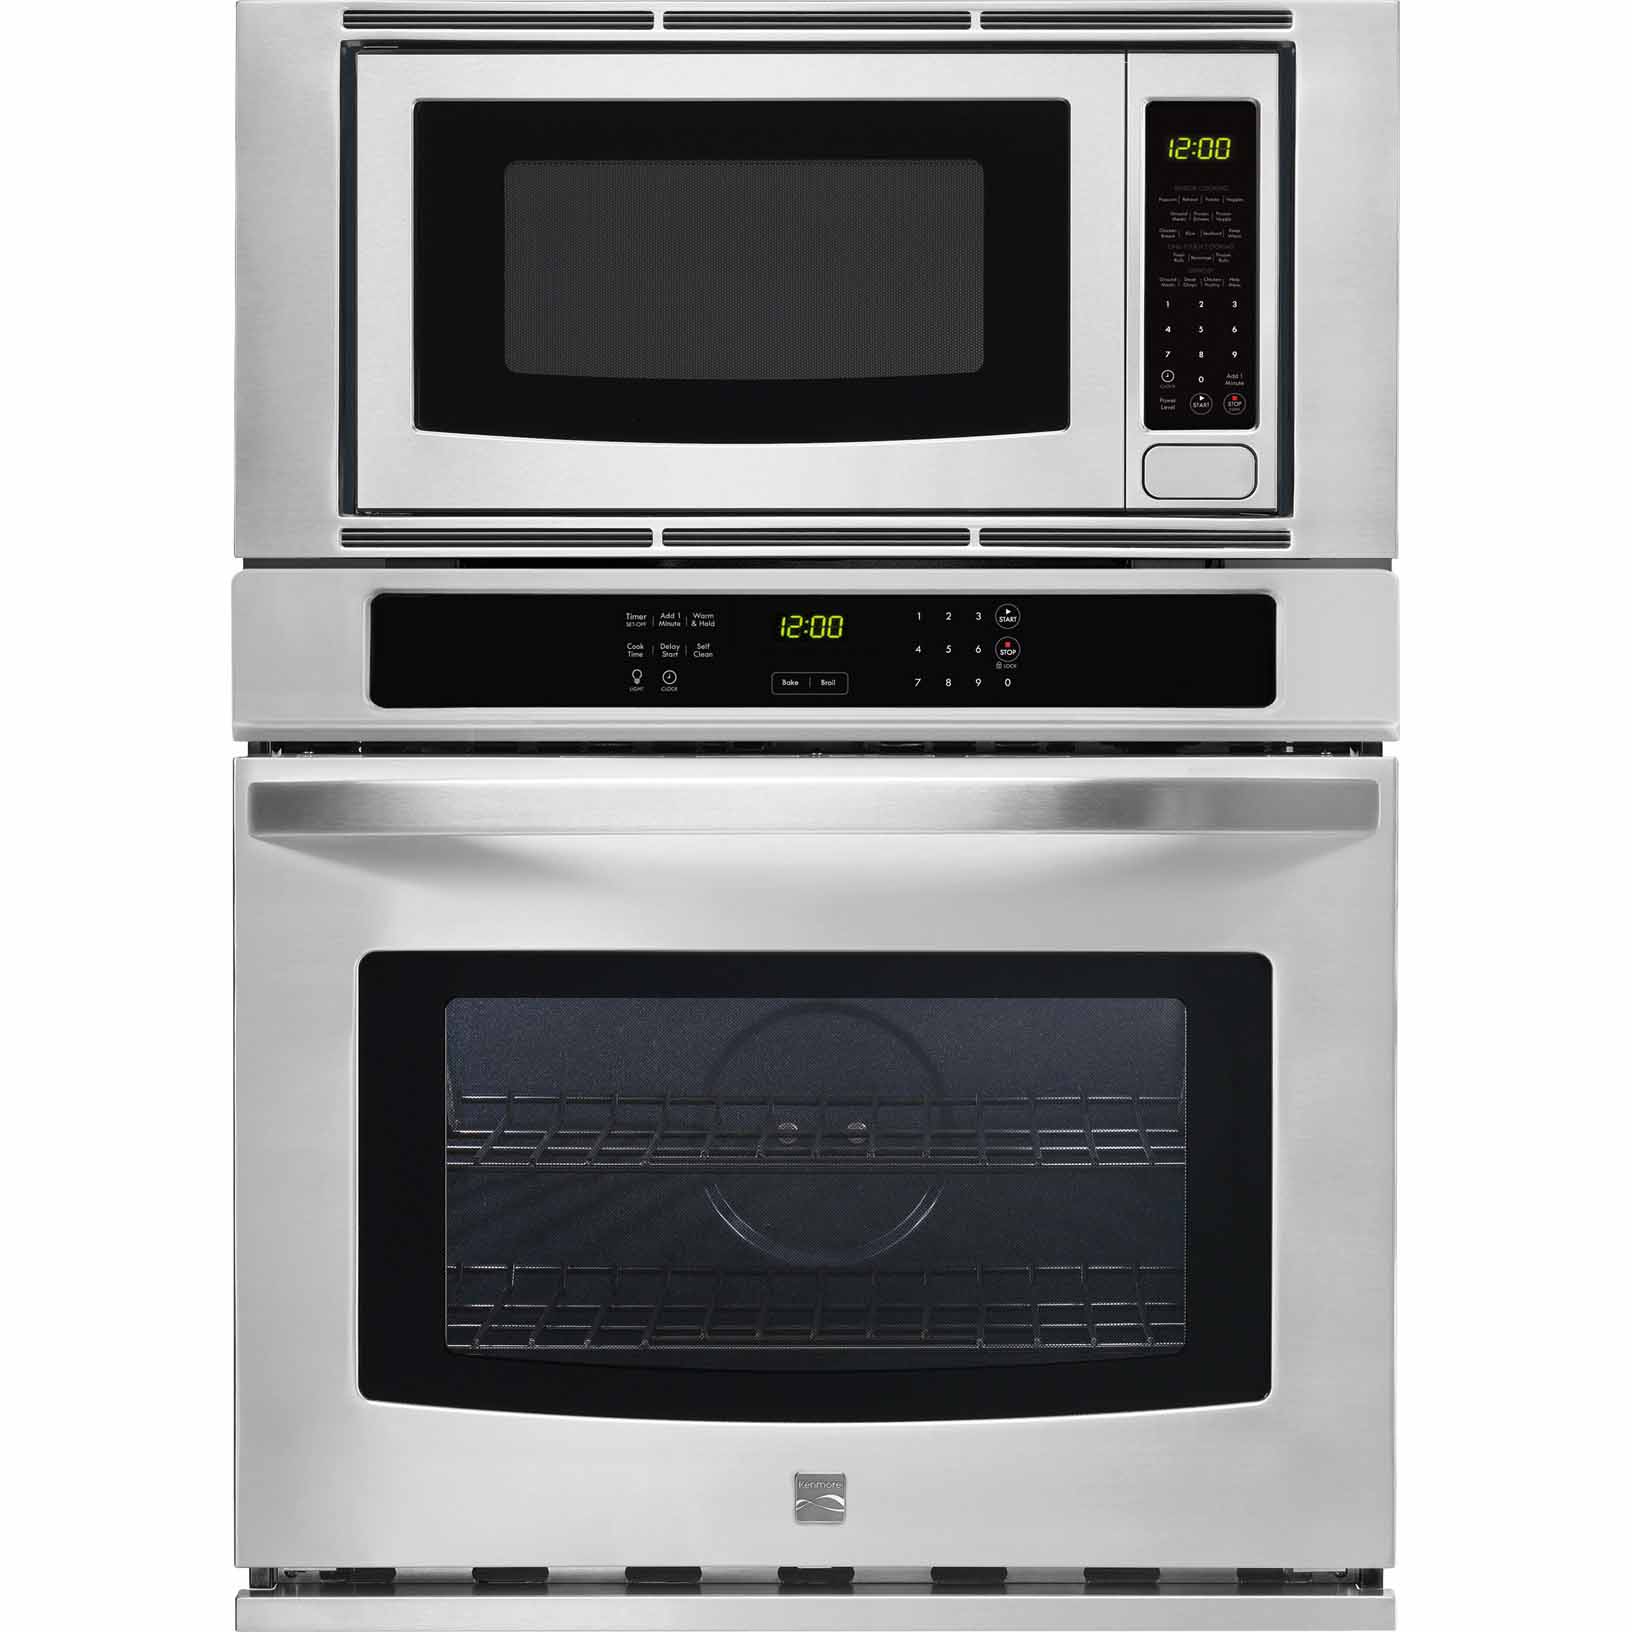 0012505801228 - 49603 27 ELECTRIC COMBINATION WALL OVEN - STAINLESS STEEL